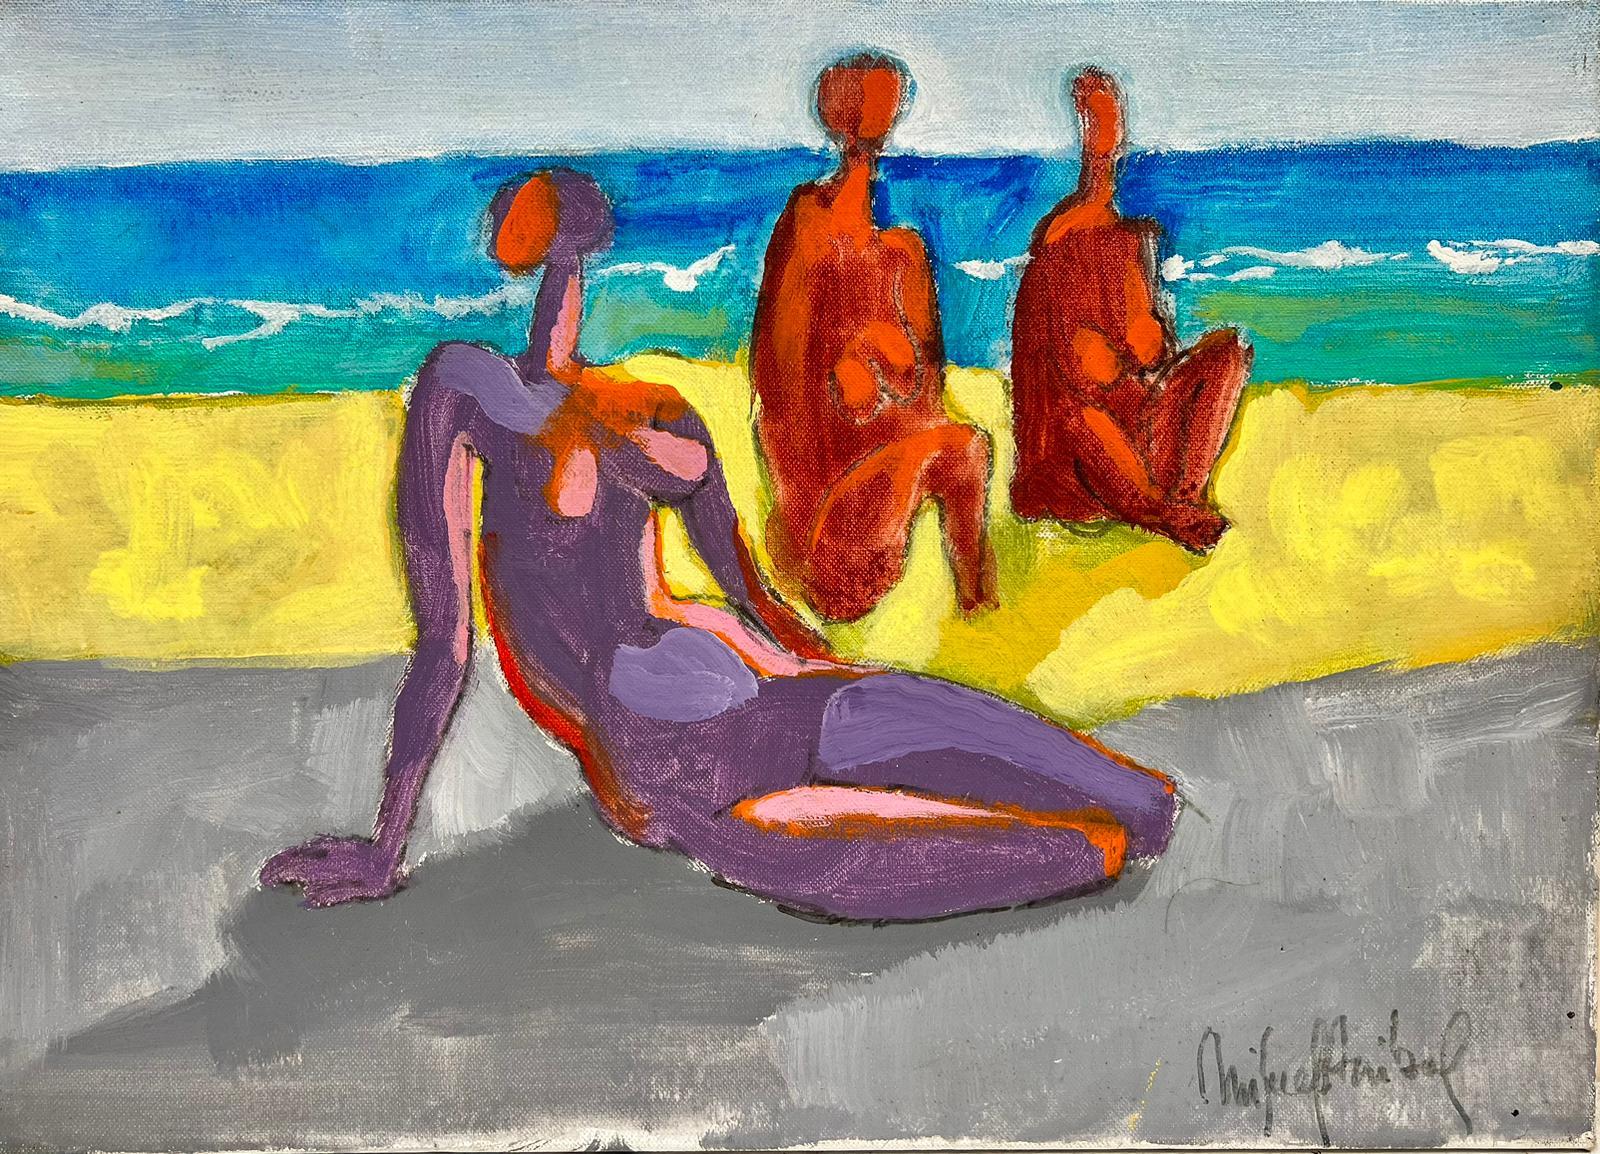 Miguel Anibal Figurative Painting - Contemporary Abstract Oil Painting Nude Figures on Sunny Beach, Chilean Artist